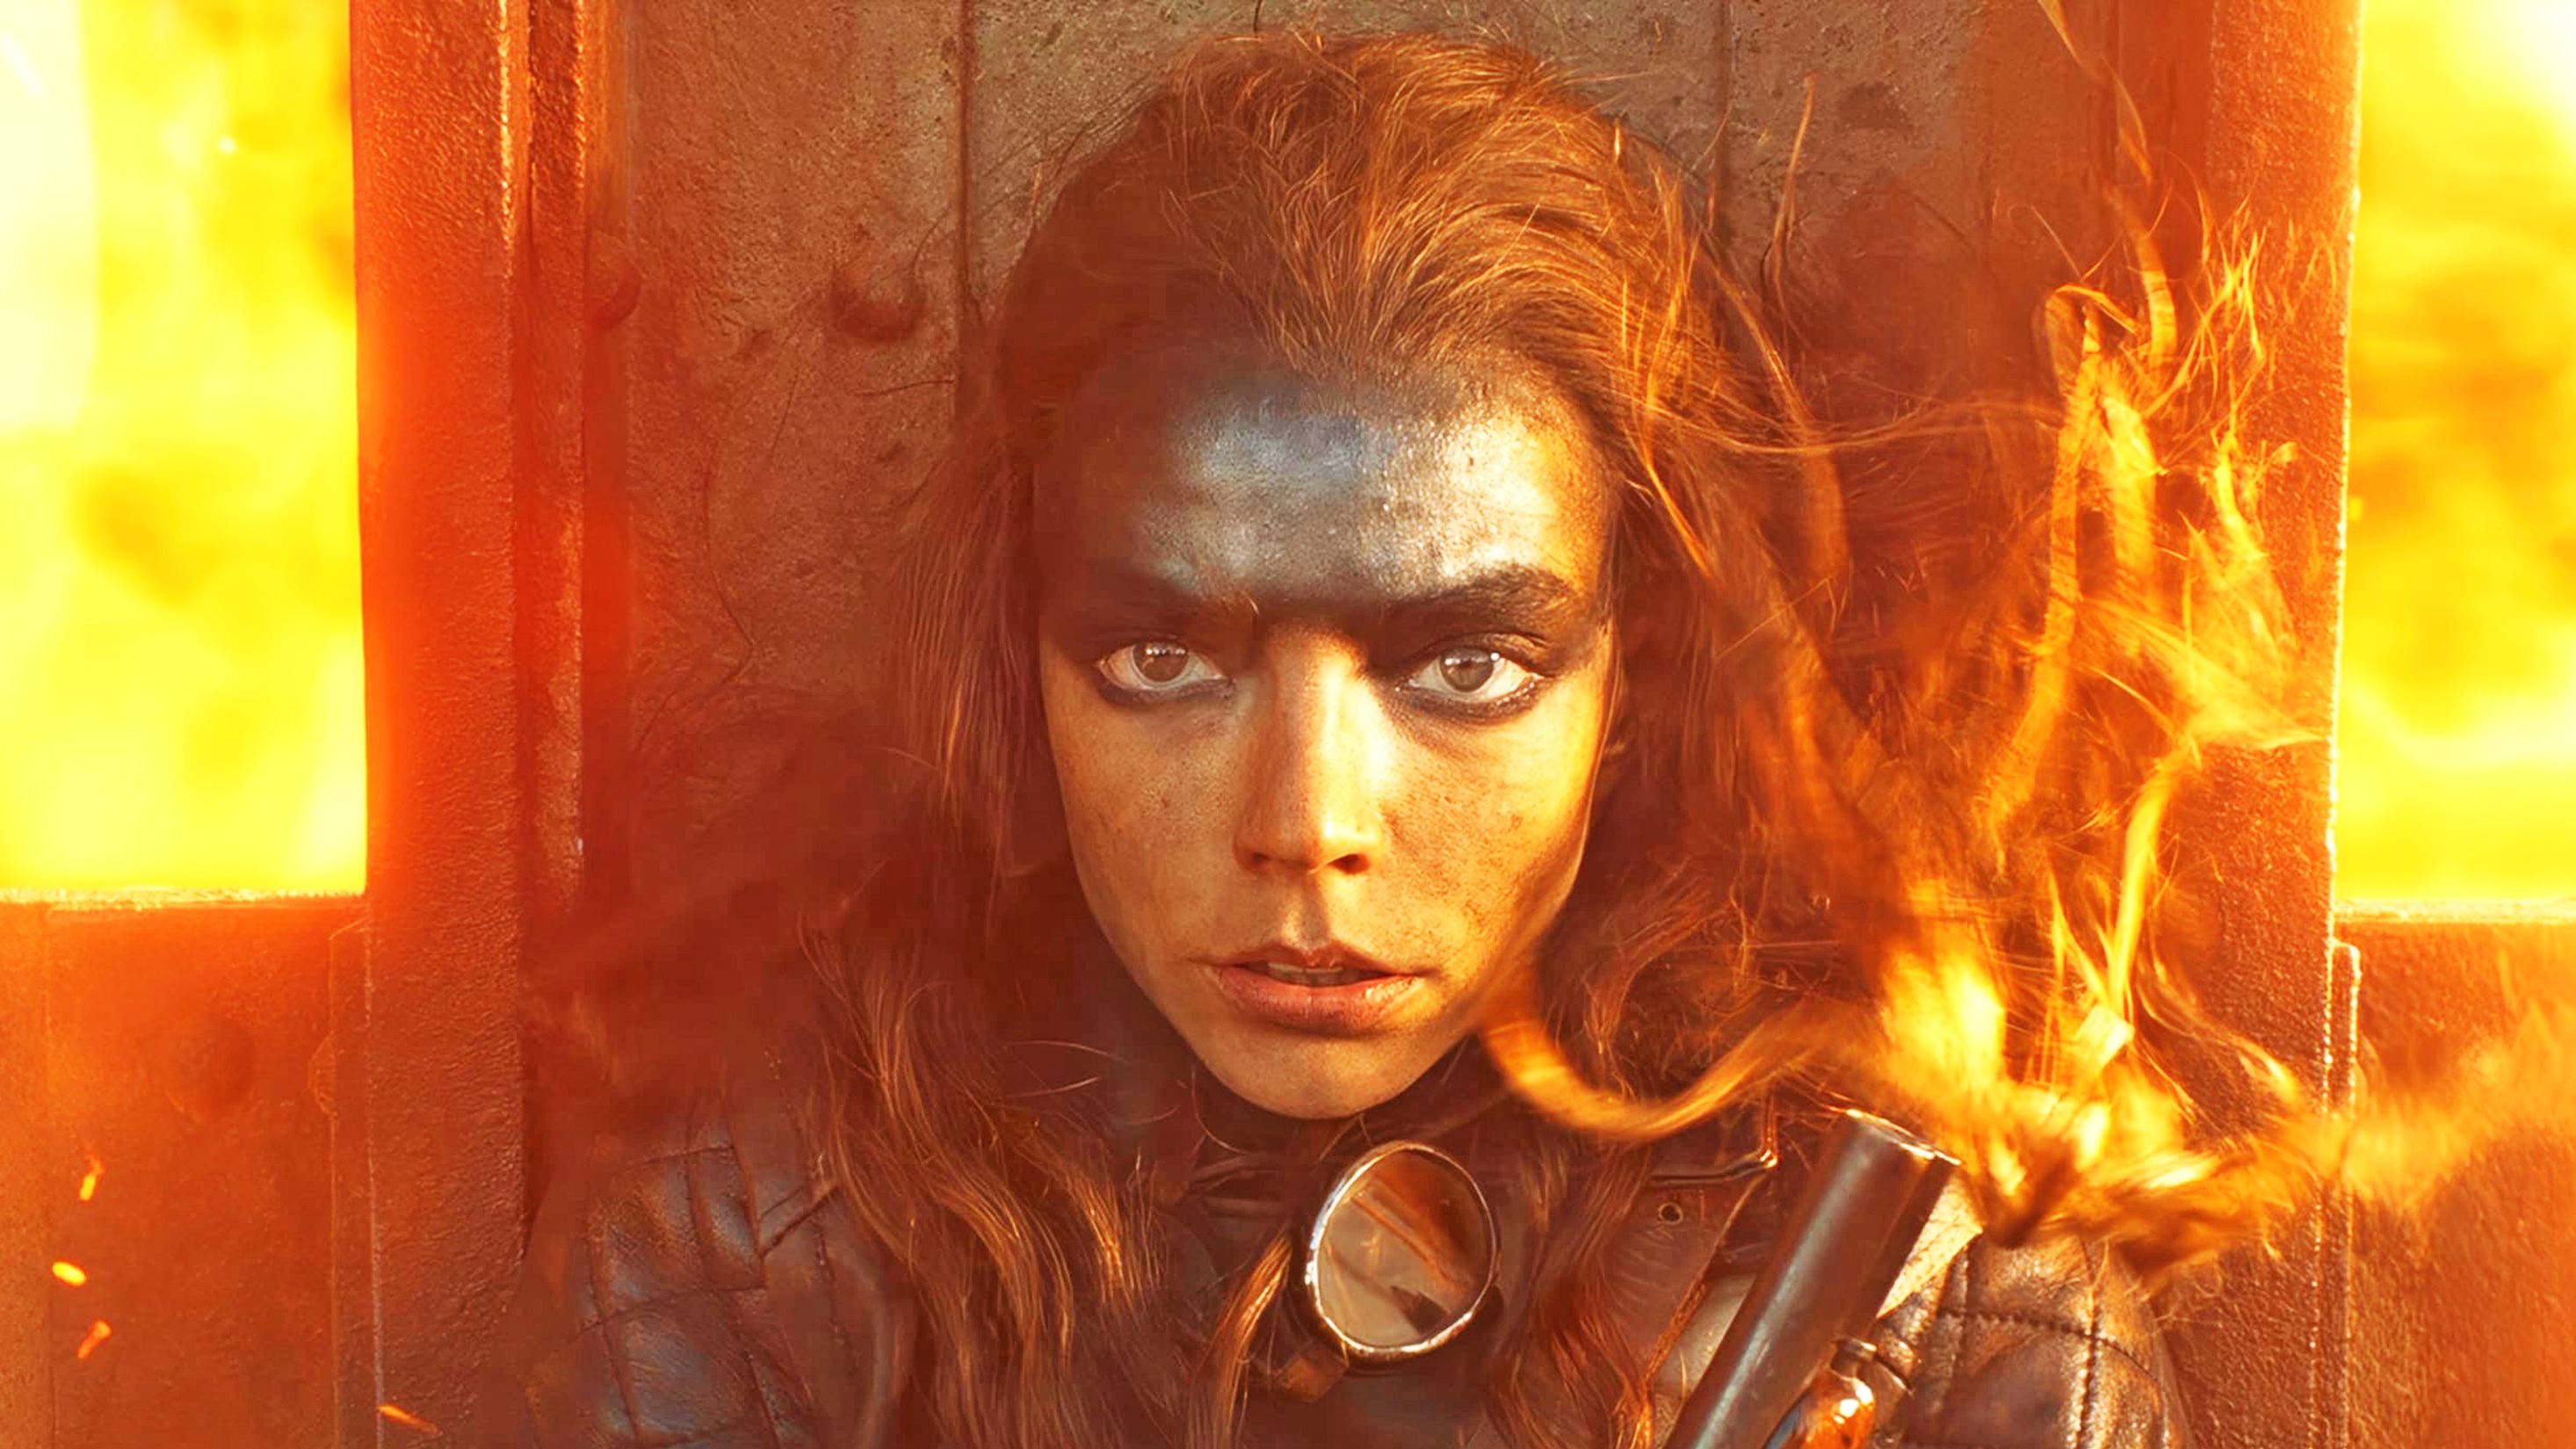 Is the Mad Max film summer’s must-see blockbuster?